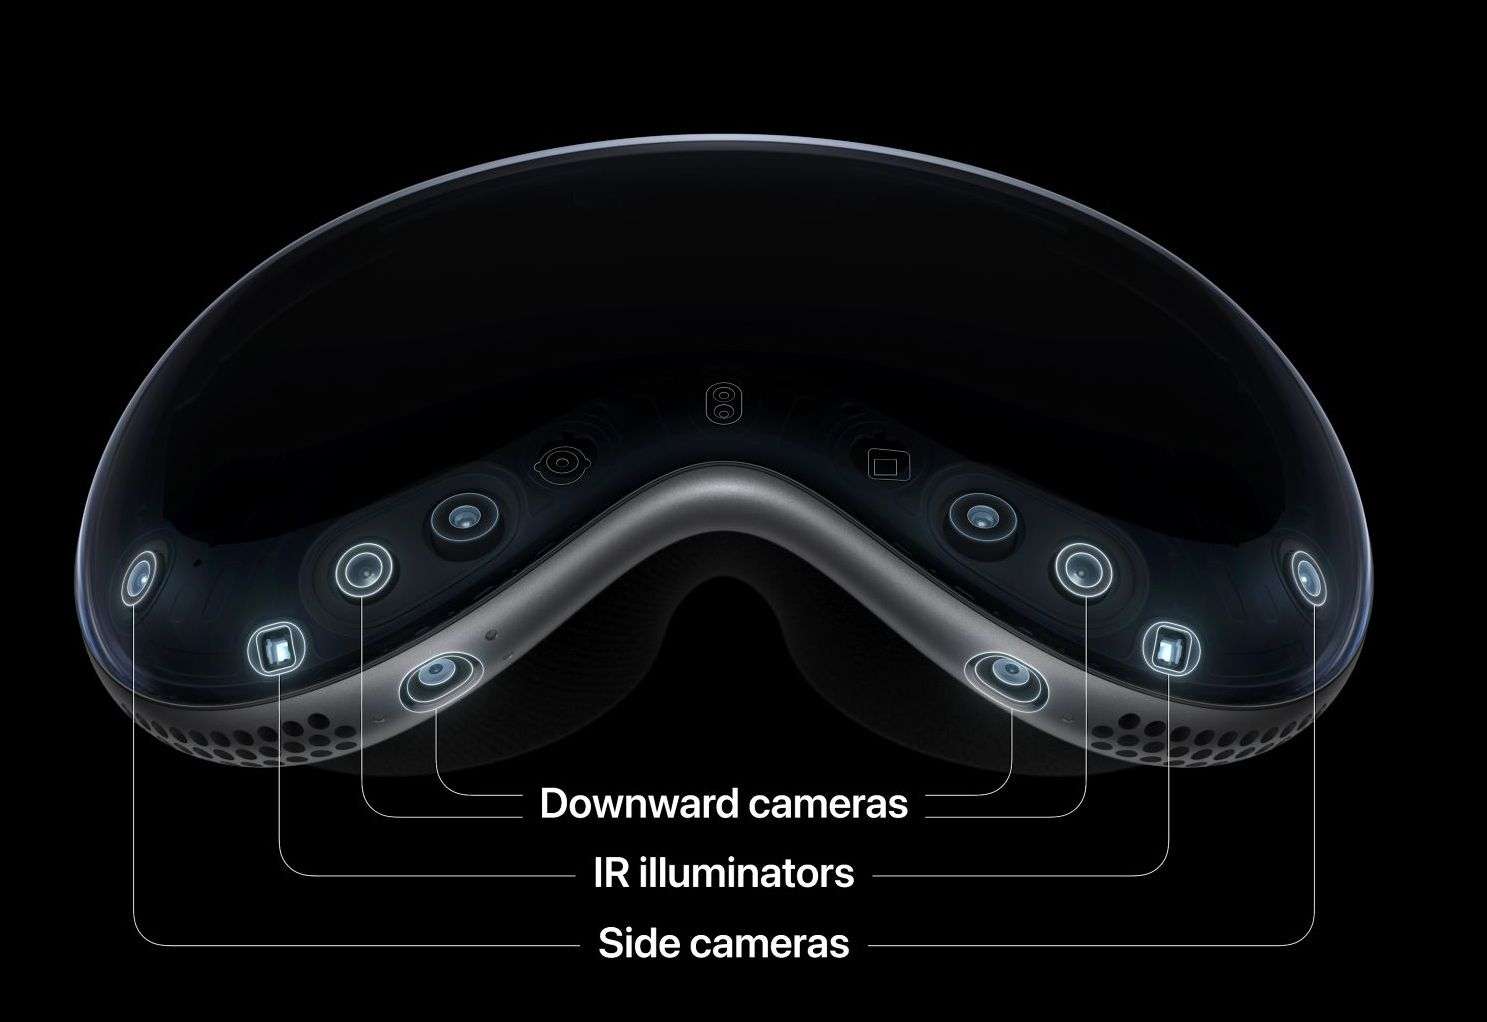 The IR Eye Tracking Innovation in Apple’s Vision Pro